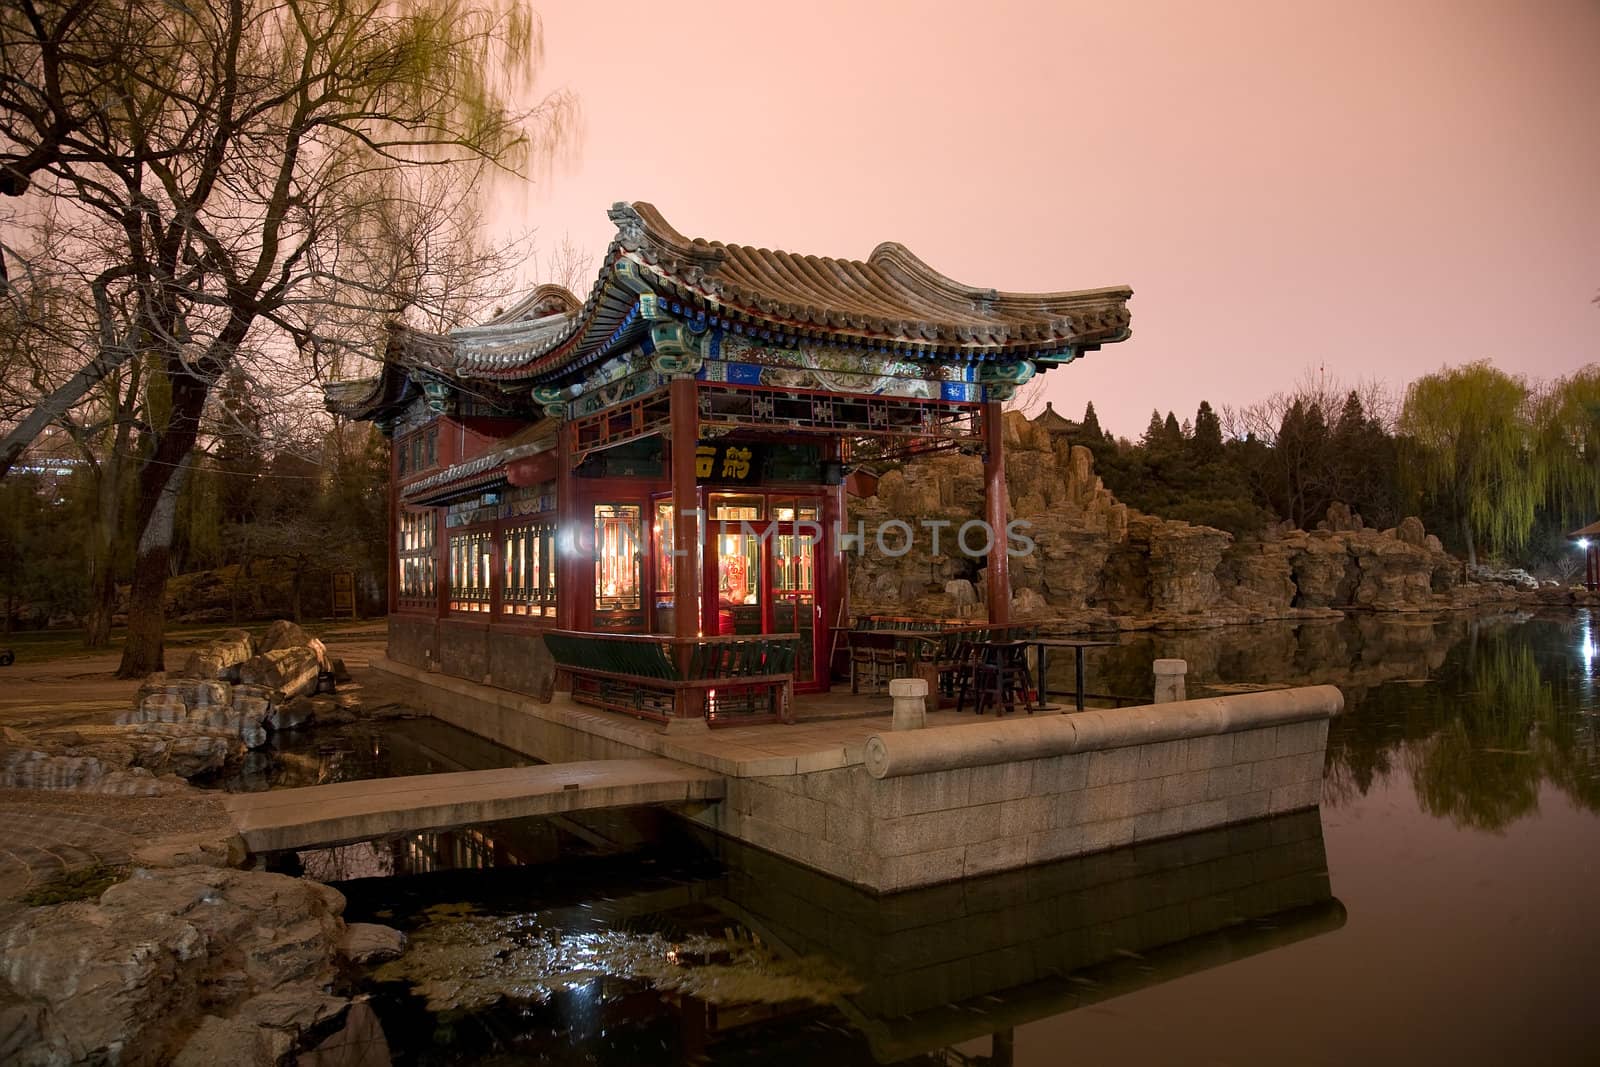 Stone Boat Bar Temple of Sun Beijing China Evening Pond Reflection

Resubmit--In response to comments from reviewer have further processed image to reduce noise, sharpen focus and increase color.